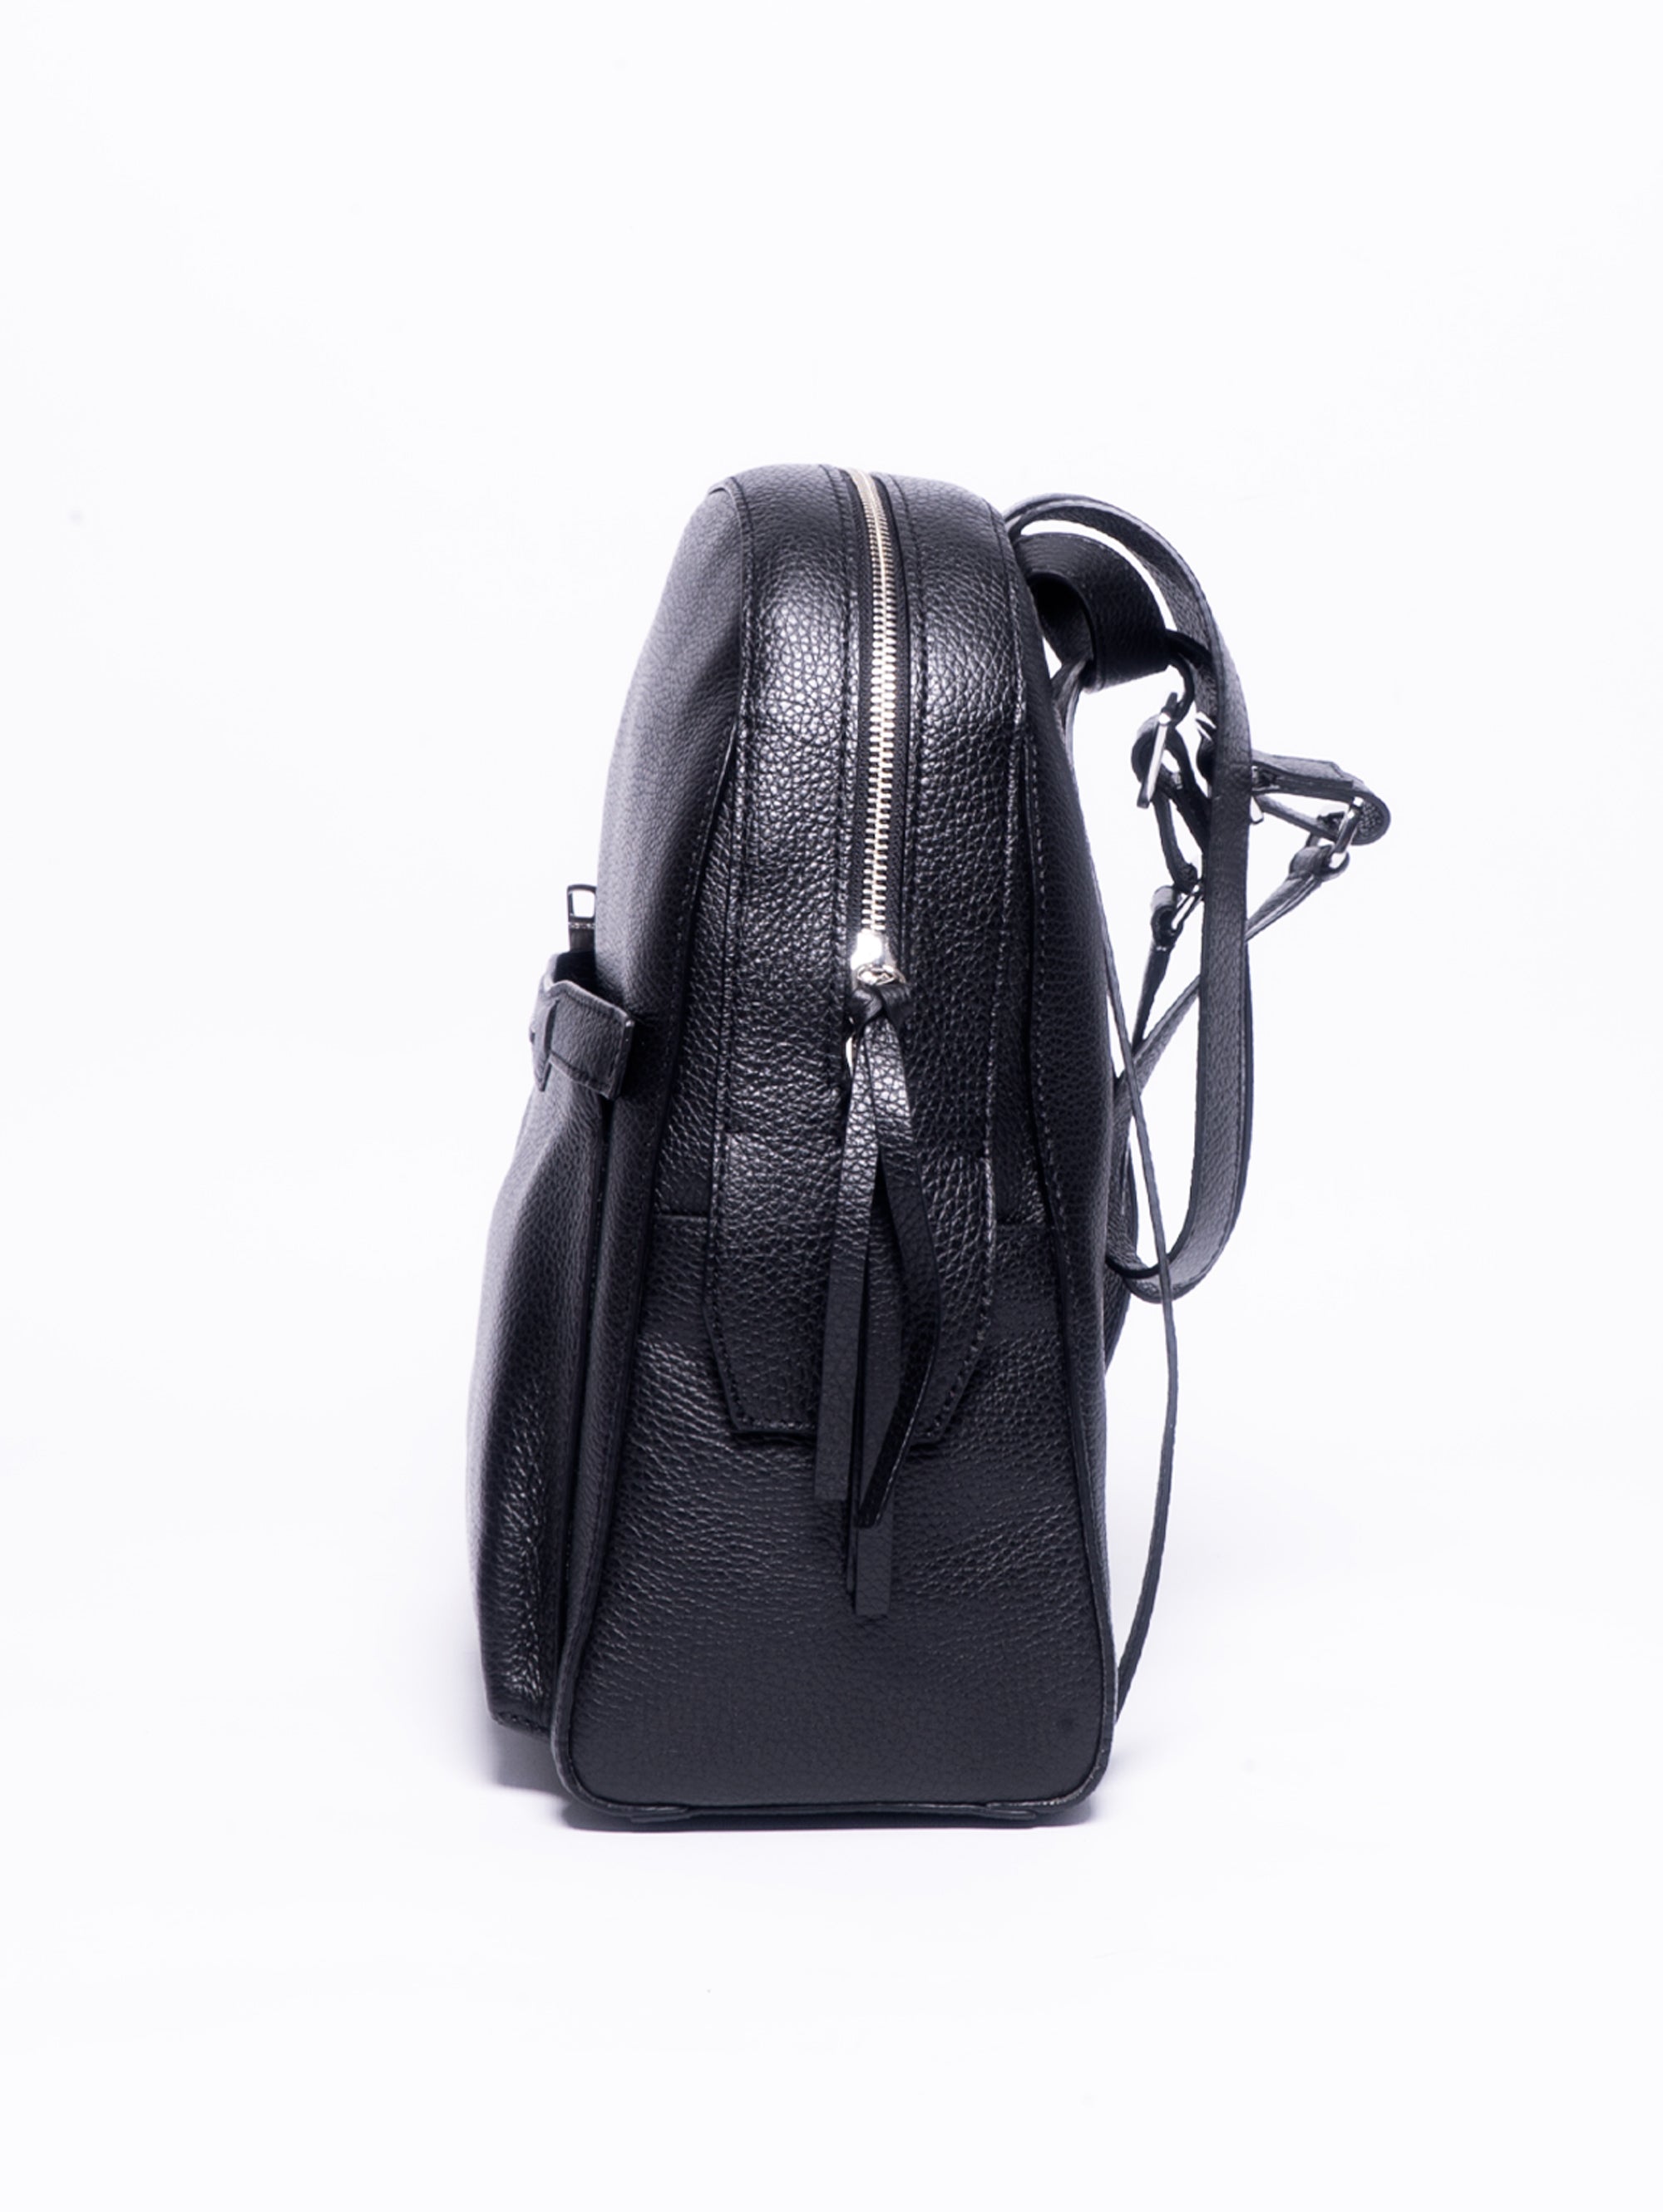 Posh Backpack in Black Grained Leather